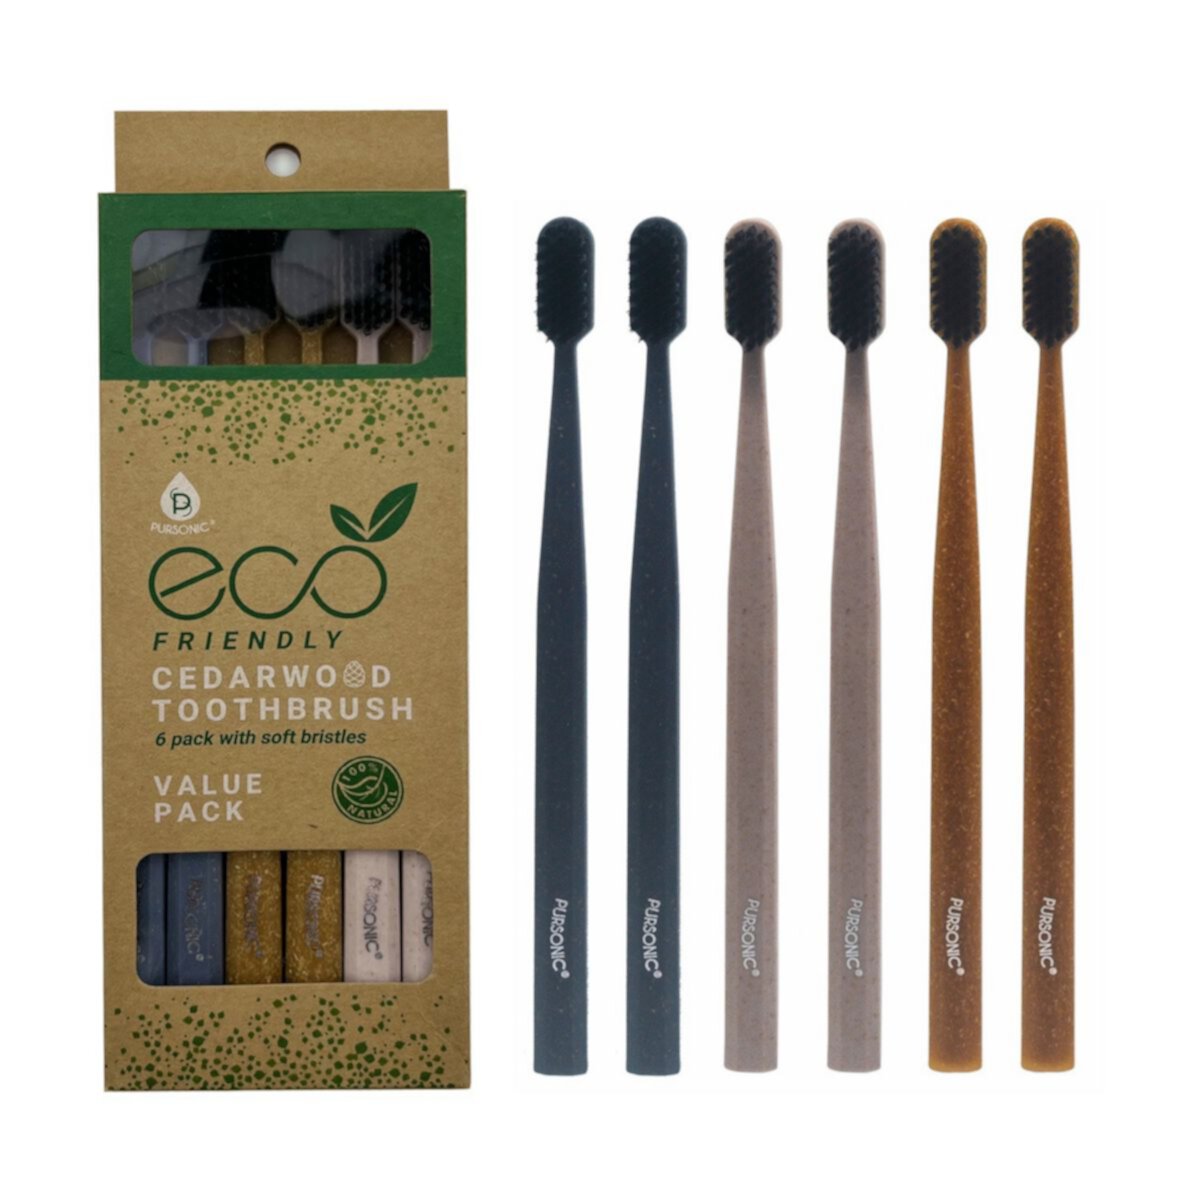 Pursonic Eco-friendly Cedarwood Toothbrushes (6 Pack) Pursonic